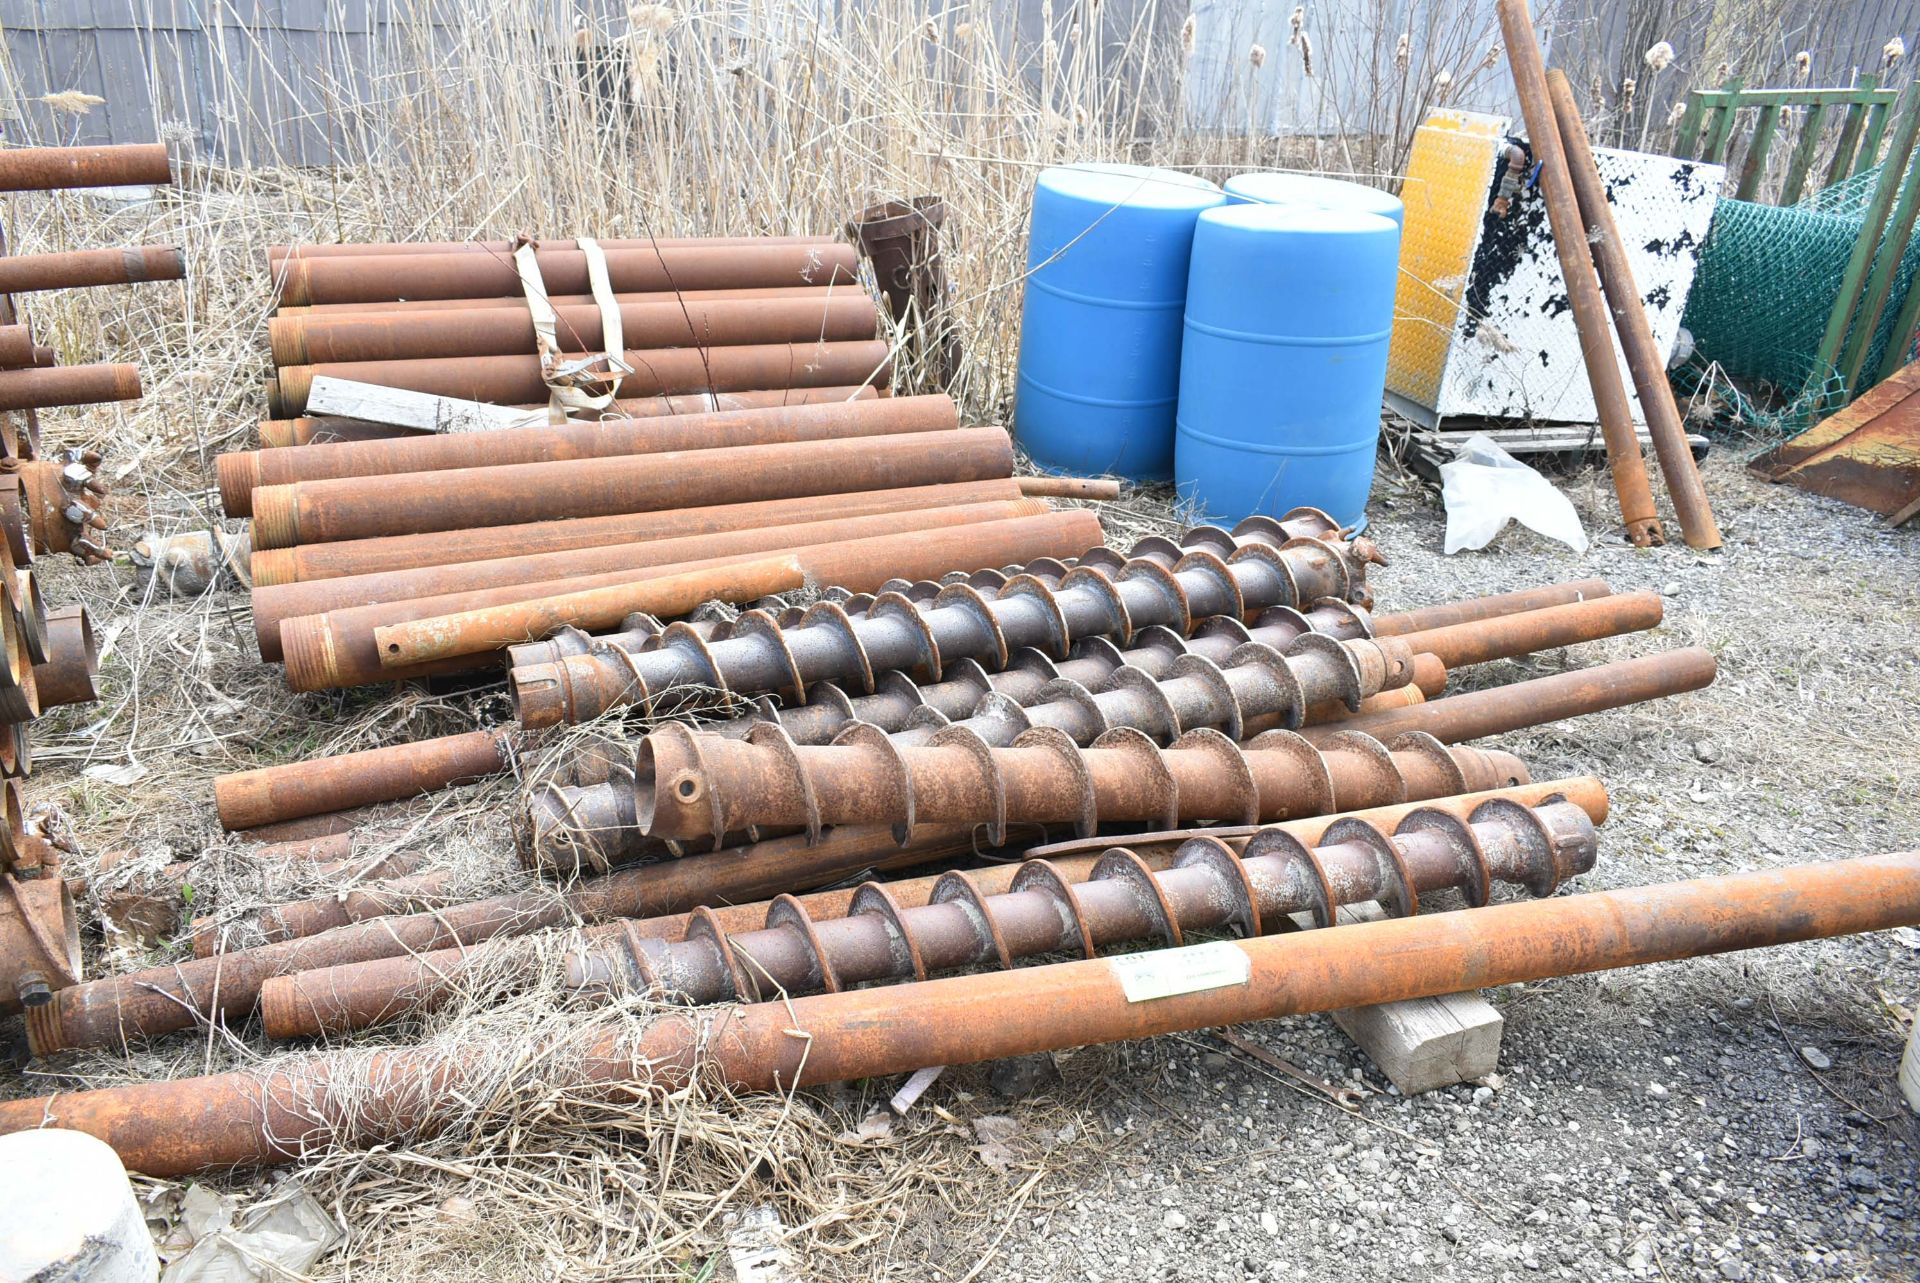 LOT/ AUGERS WITH CASINGS